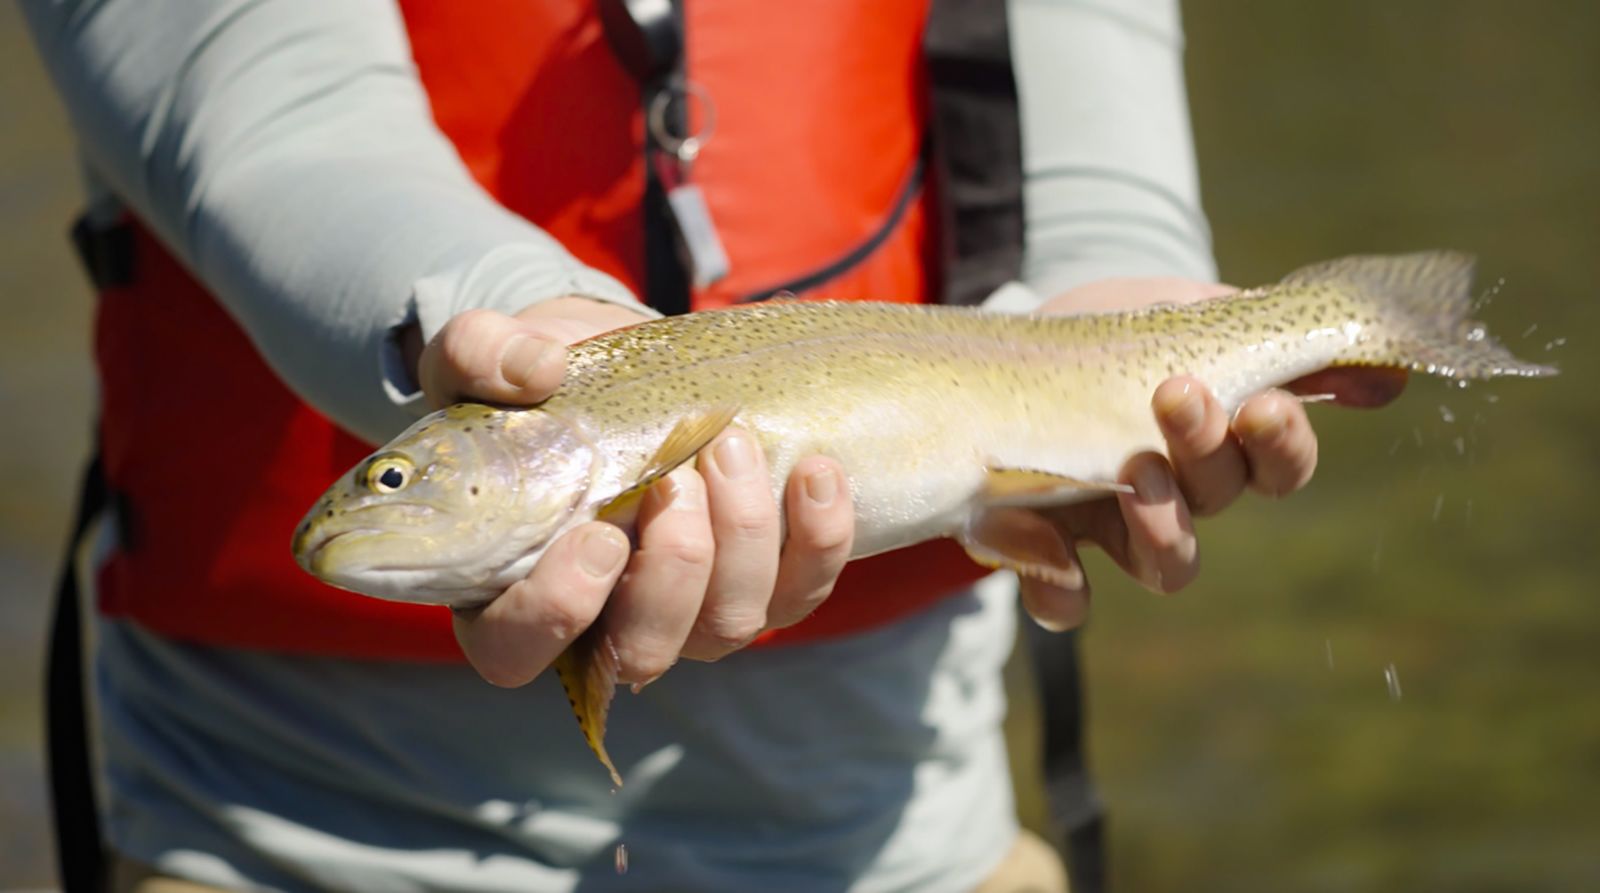 Green River Fishing Report: A Fly Fishing Guide to the Green Less Traveled  [VIDEO]